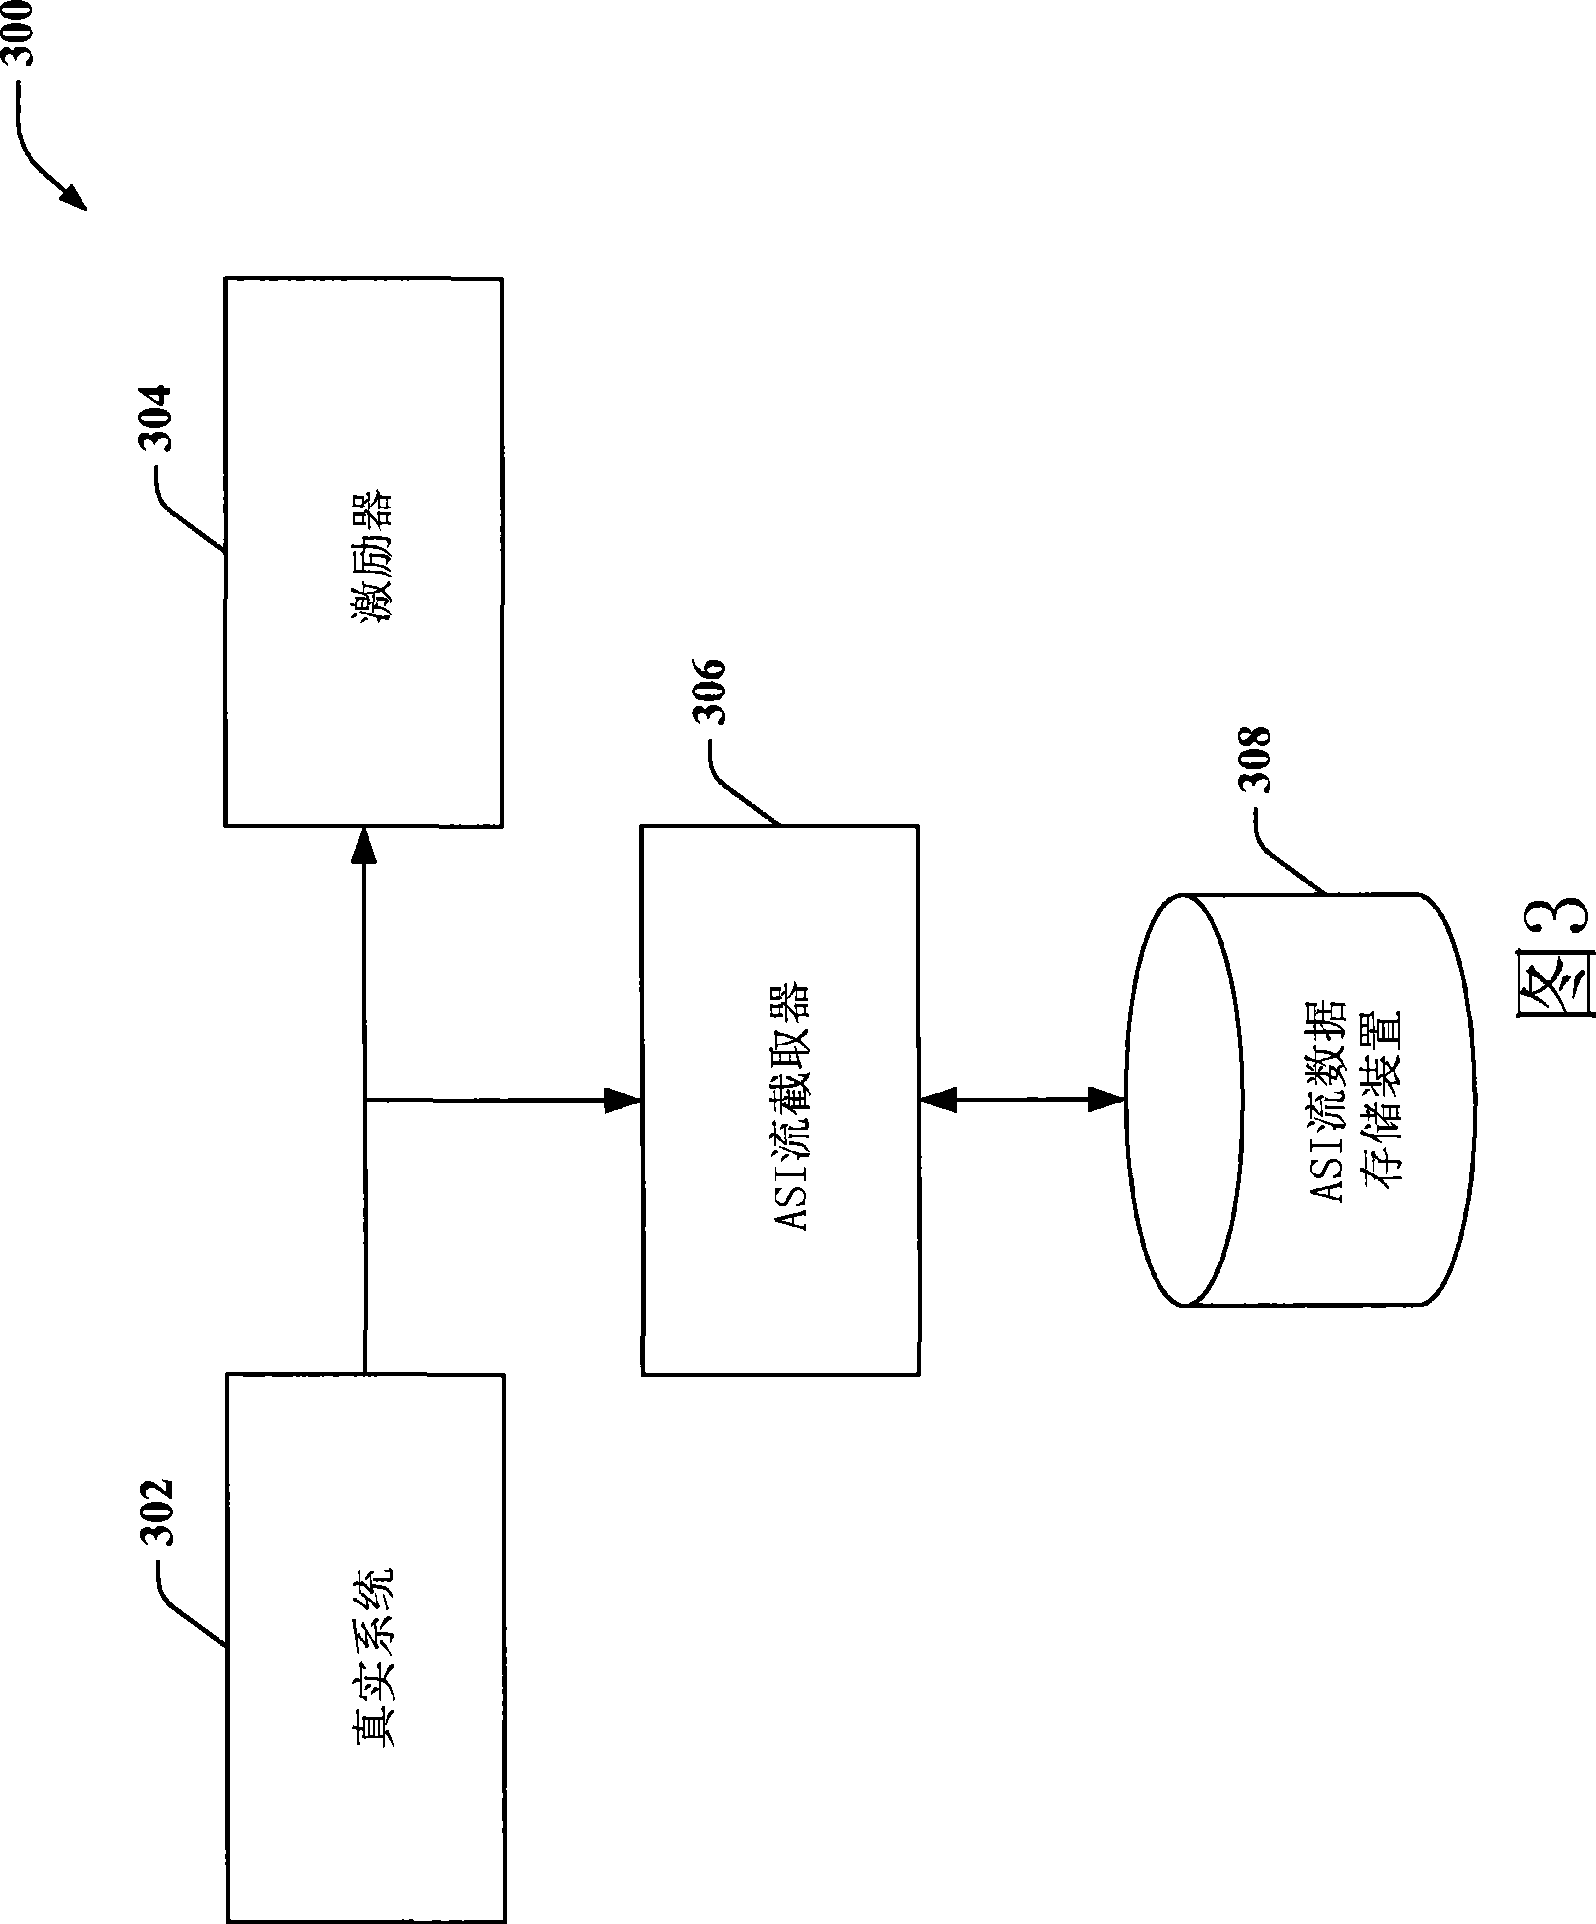 Method and apparatus for enabling flo device certification